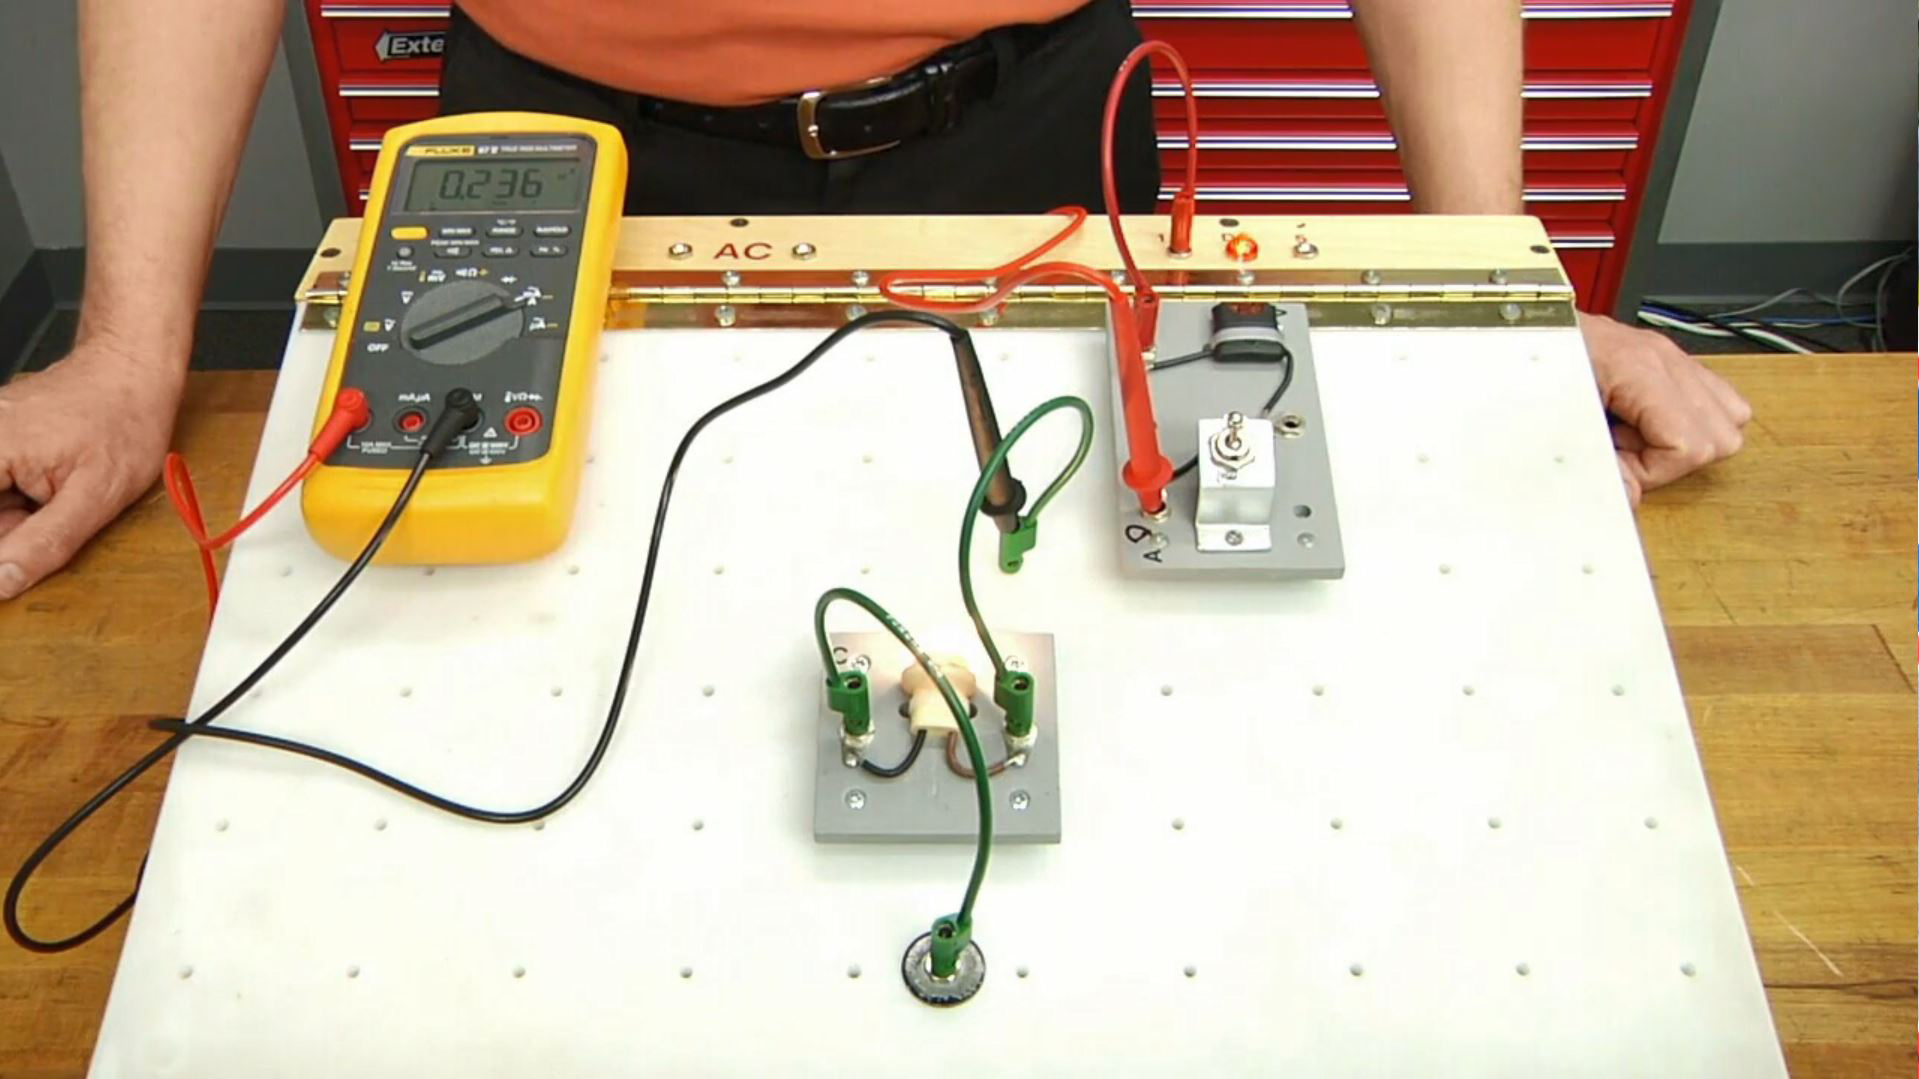 How To Check Amps In Multimeter Video: How to Use a Multimeter to Measure Electrical Current -  OnAllCylinders